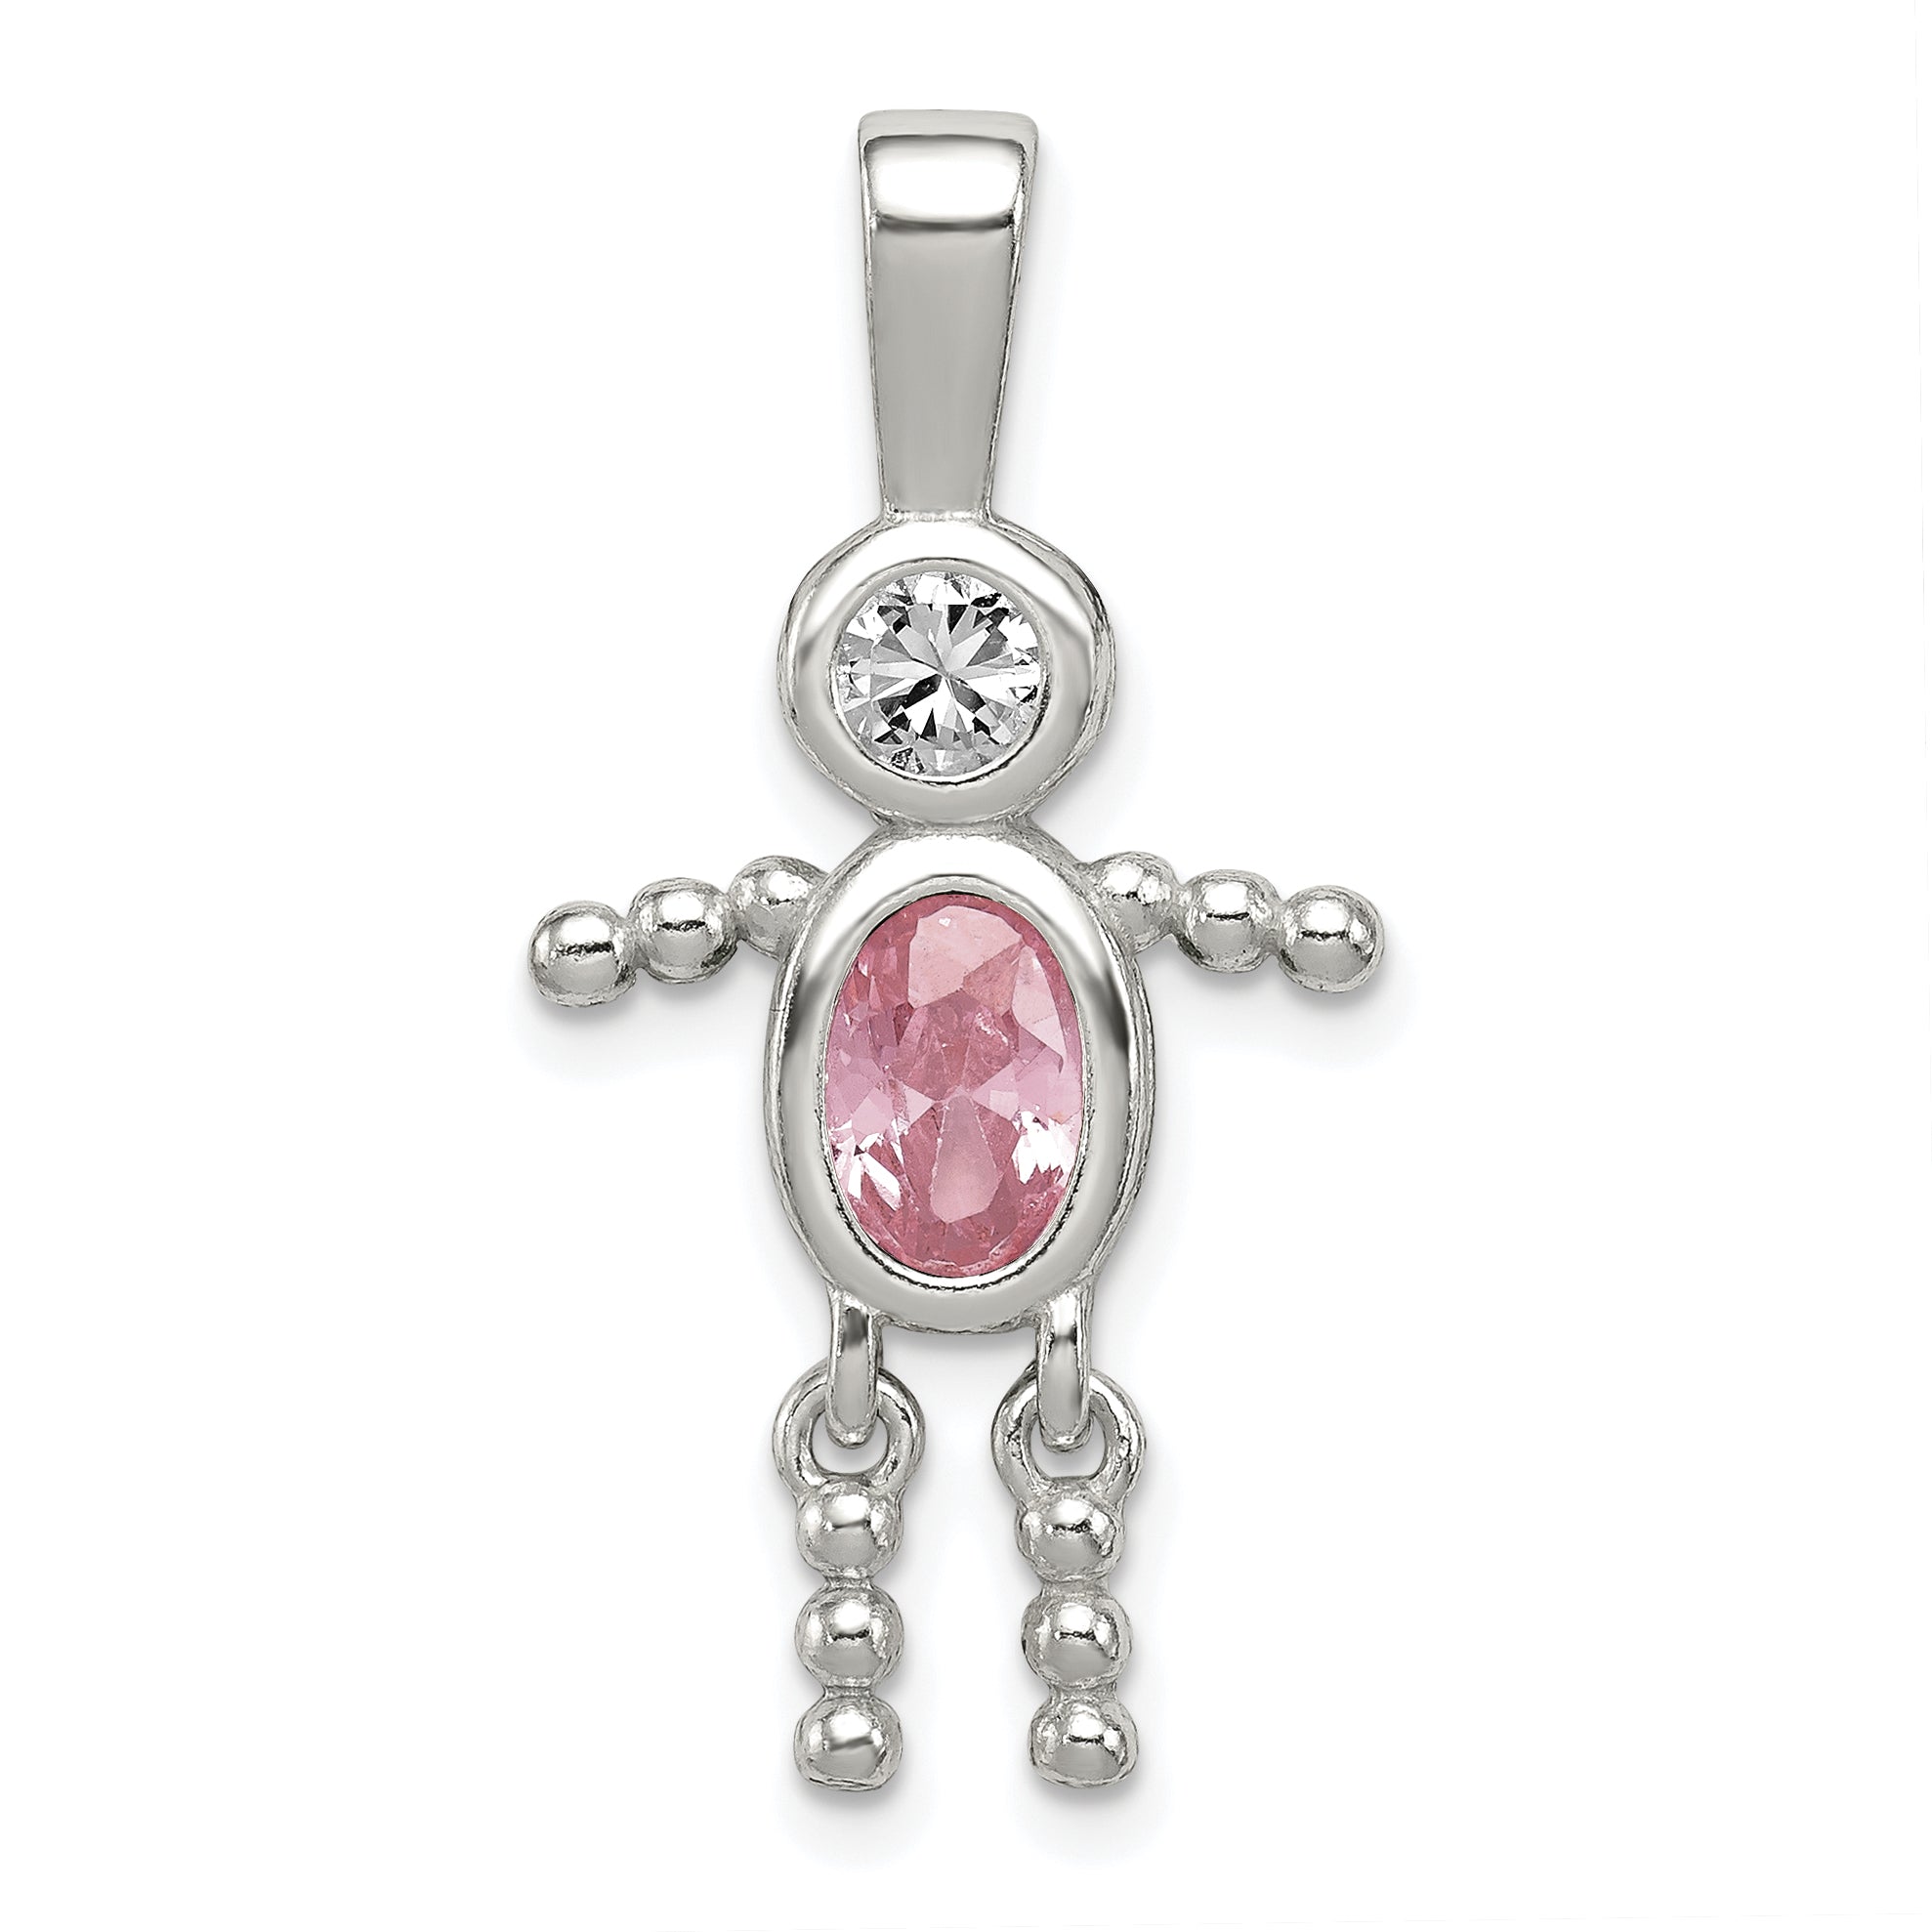 Sterling Silver Rhodium-plated CZ & October Pink CZ Boy Pendant